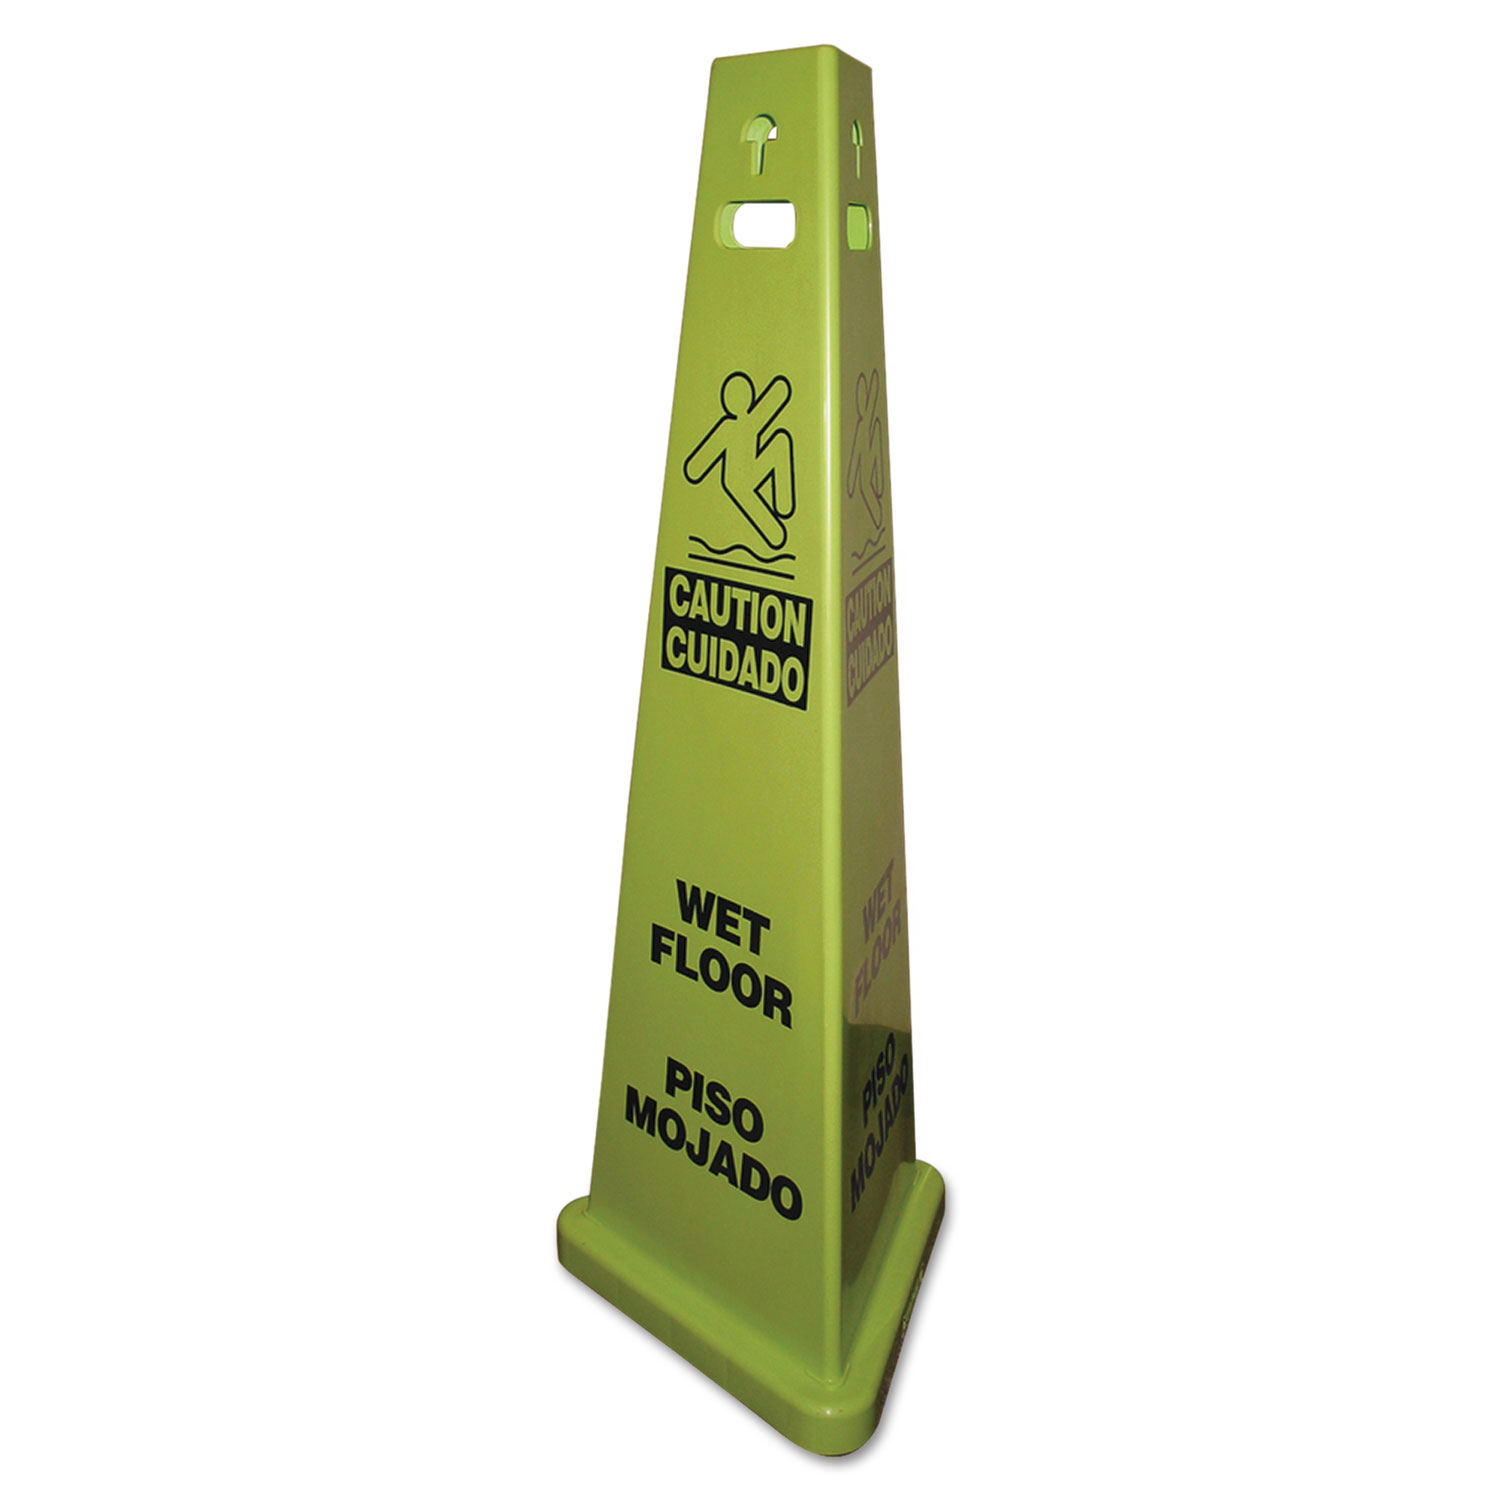  Impact 9140 TriVu 3-Sided Wet Floor Safety Sign, Yellow/Green, 14 3/4 x 4 3/4 x 40, Plastic, 3/Carton (IMP9140) 